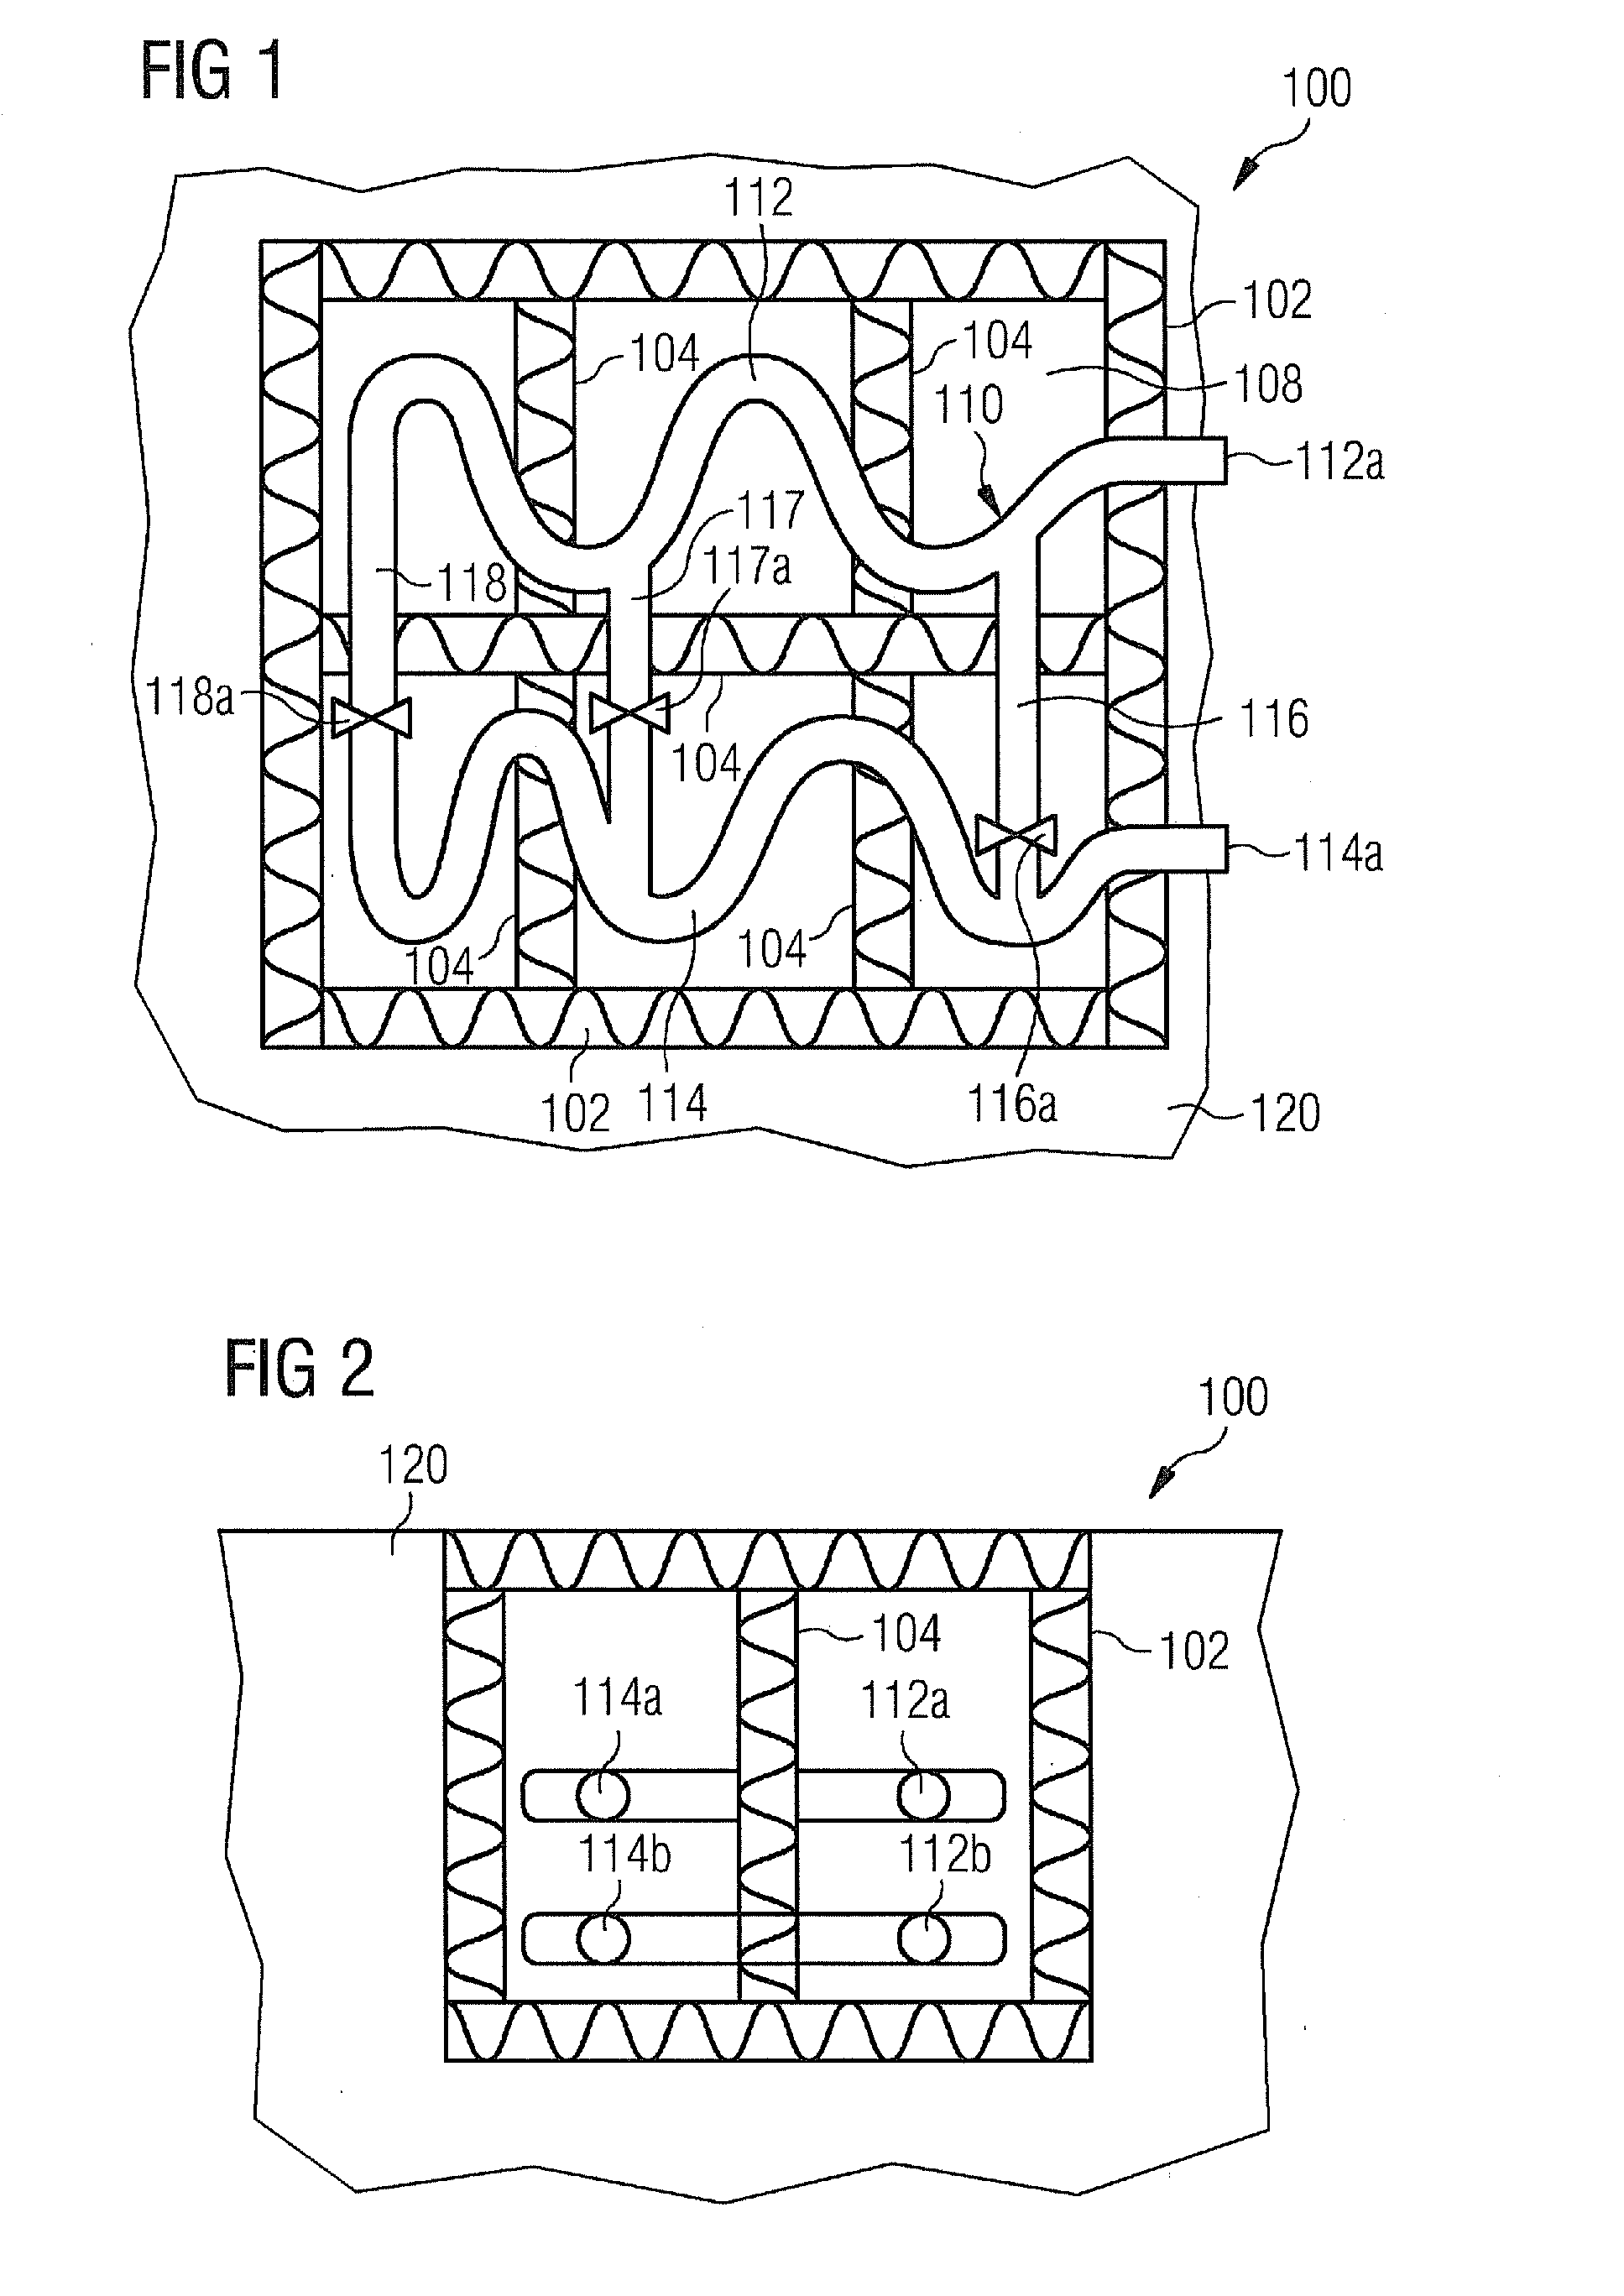 Thermal energy storage and recovery with a heat exchanger arrangement having an extended thermal interaction region